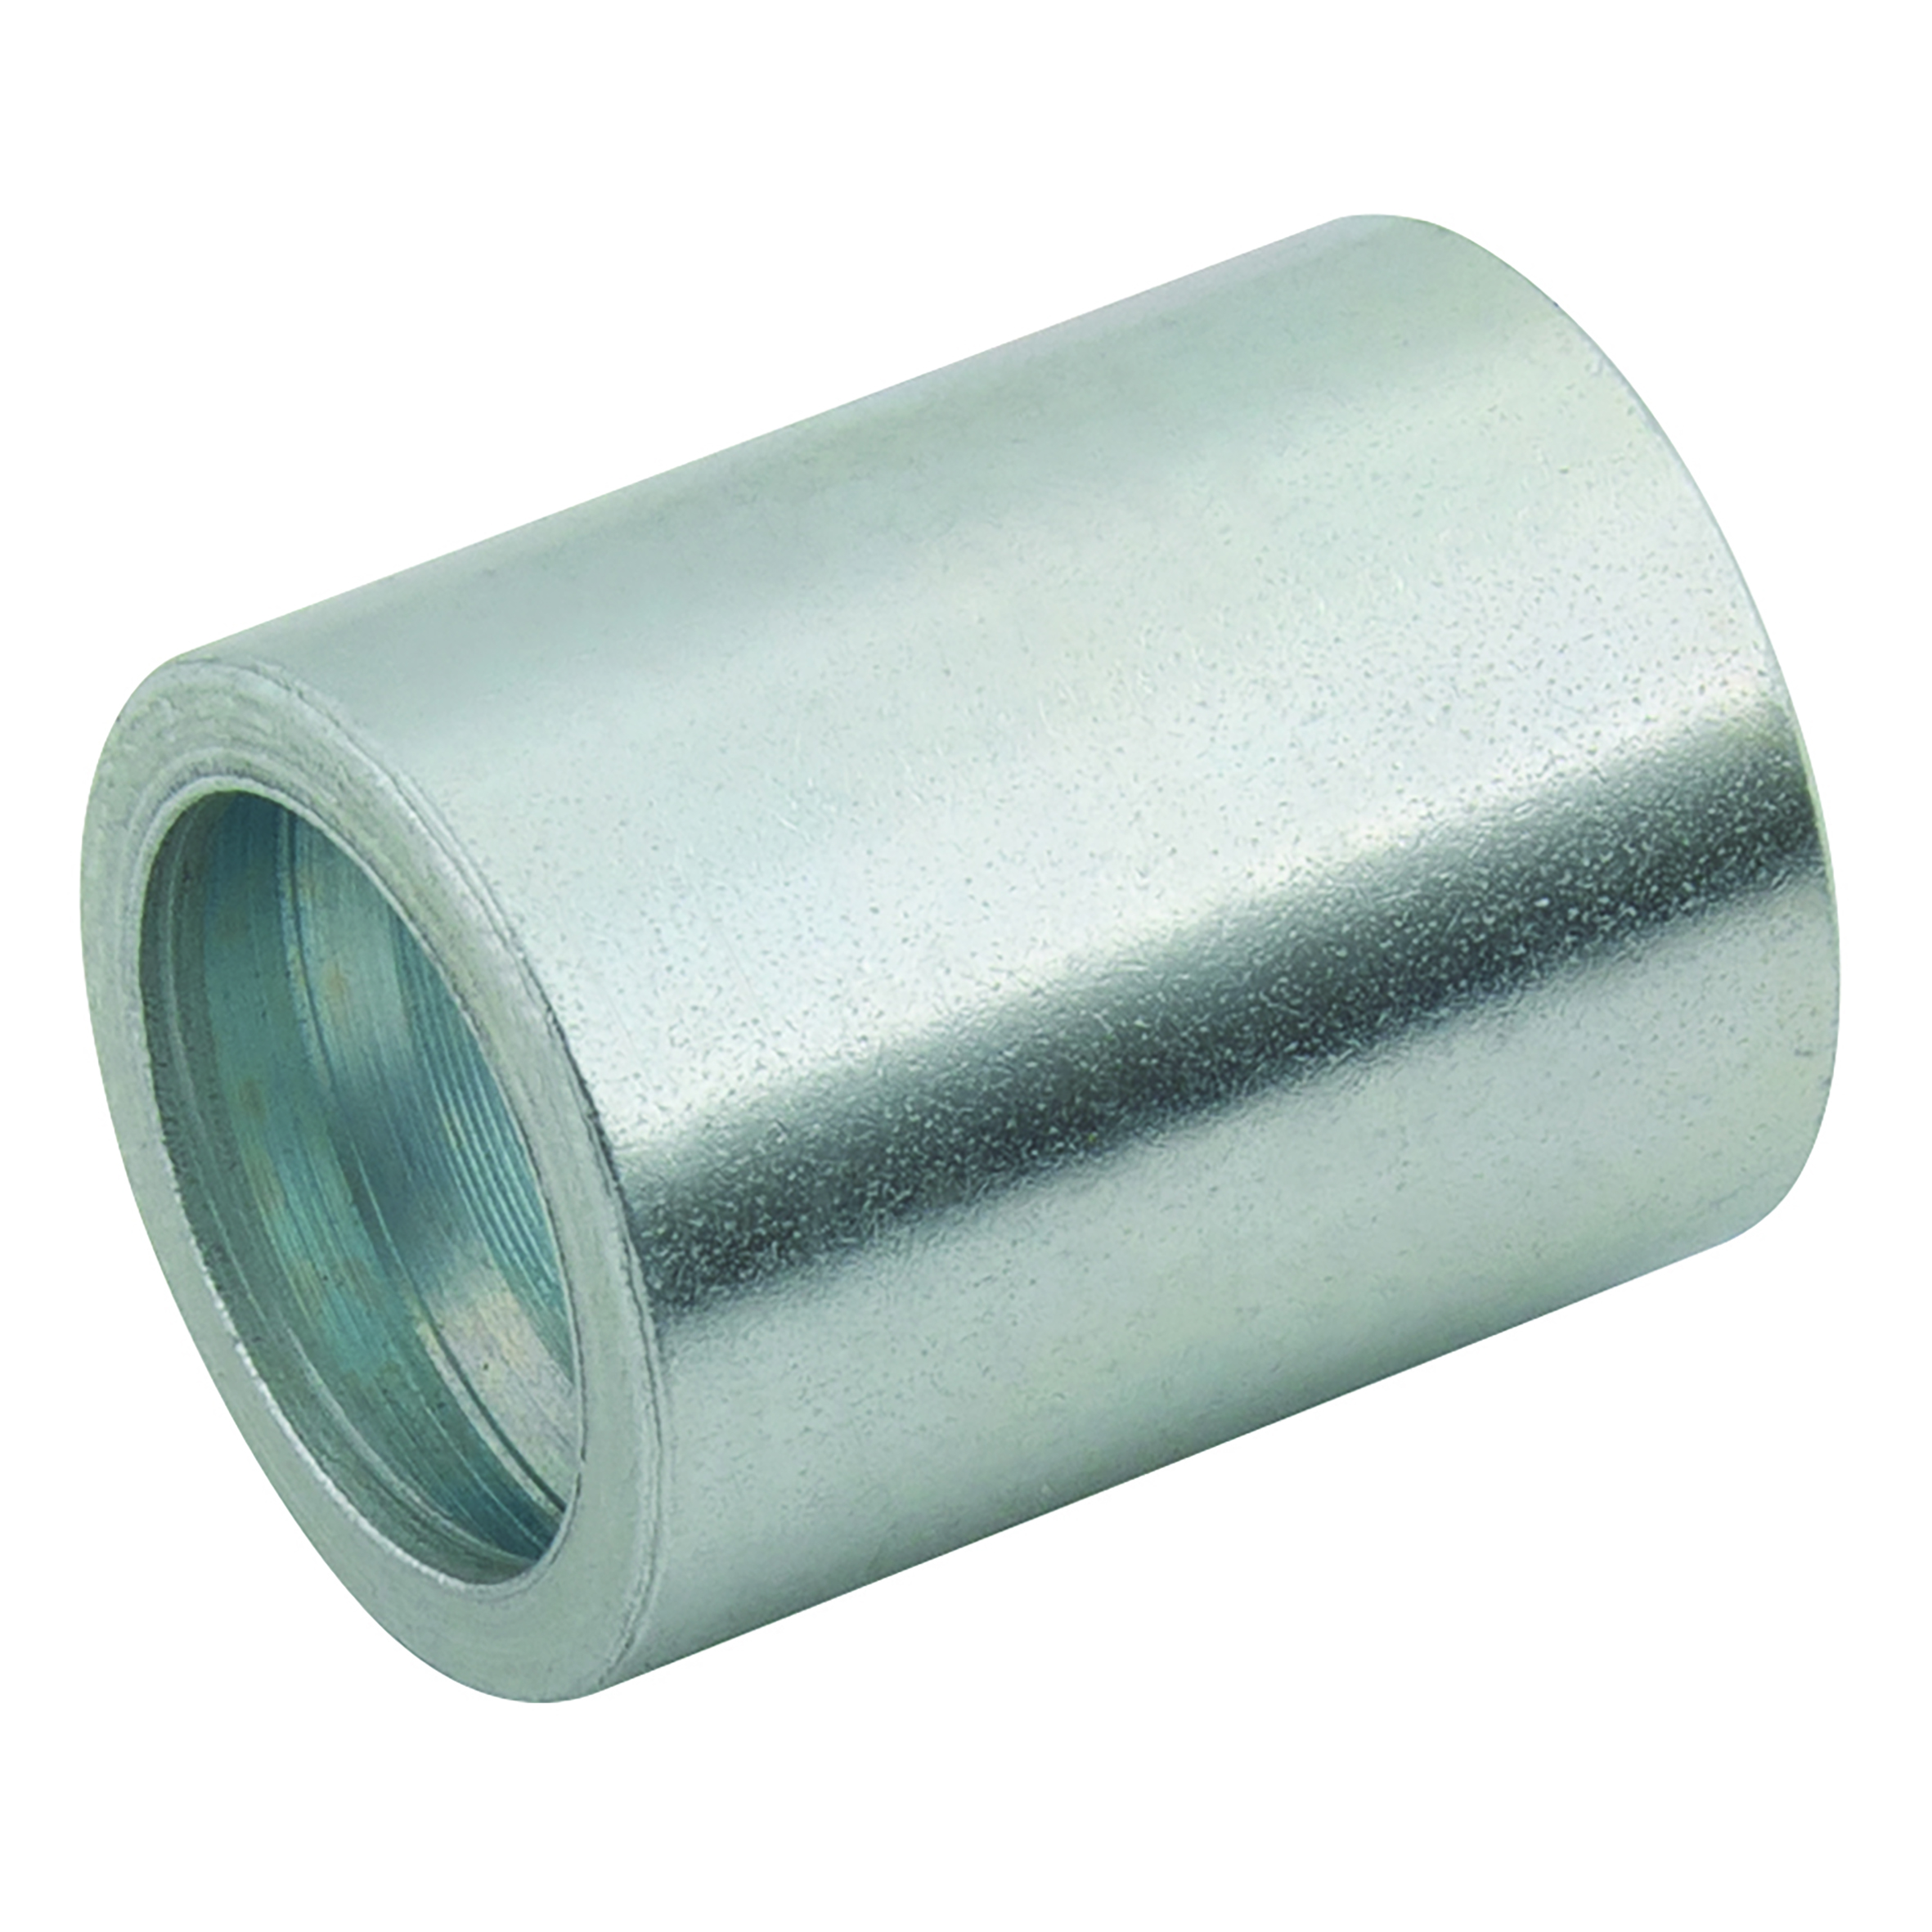 1/2"Hose Insert Ferrule Smooth and Convoluted Bore